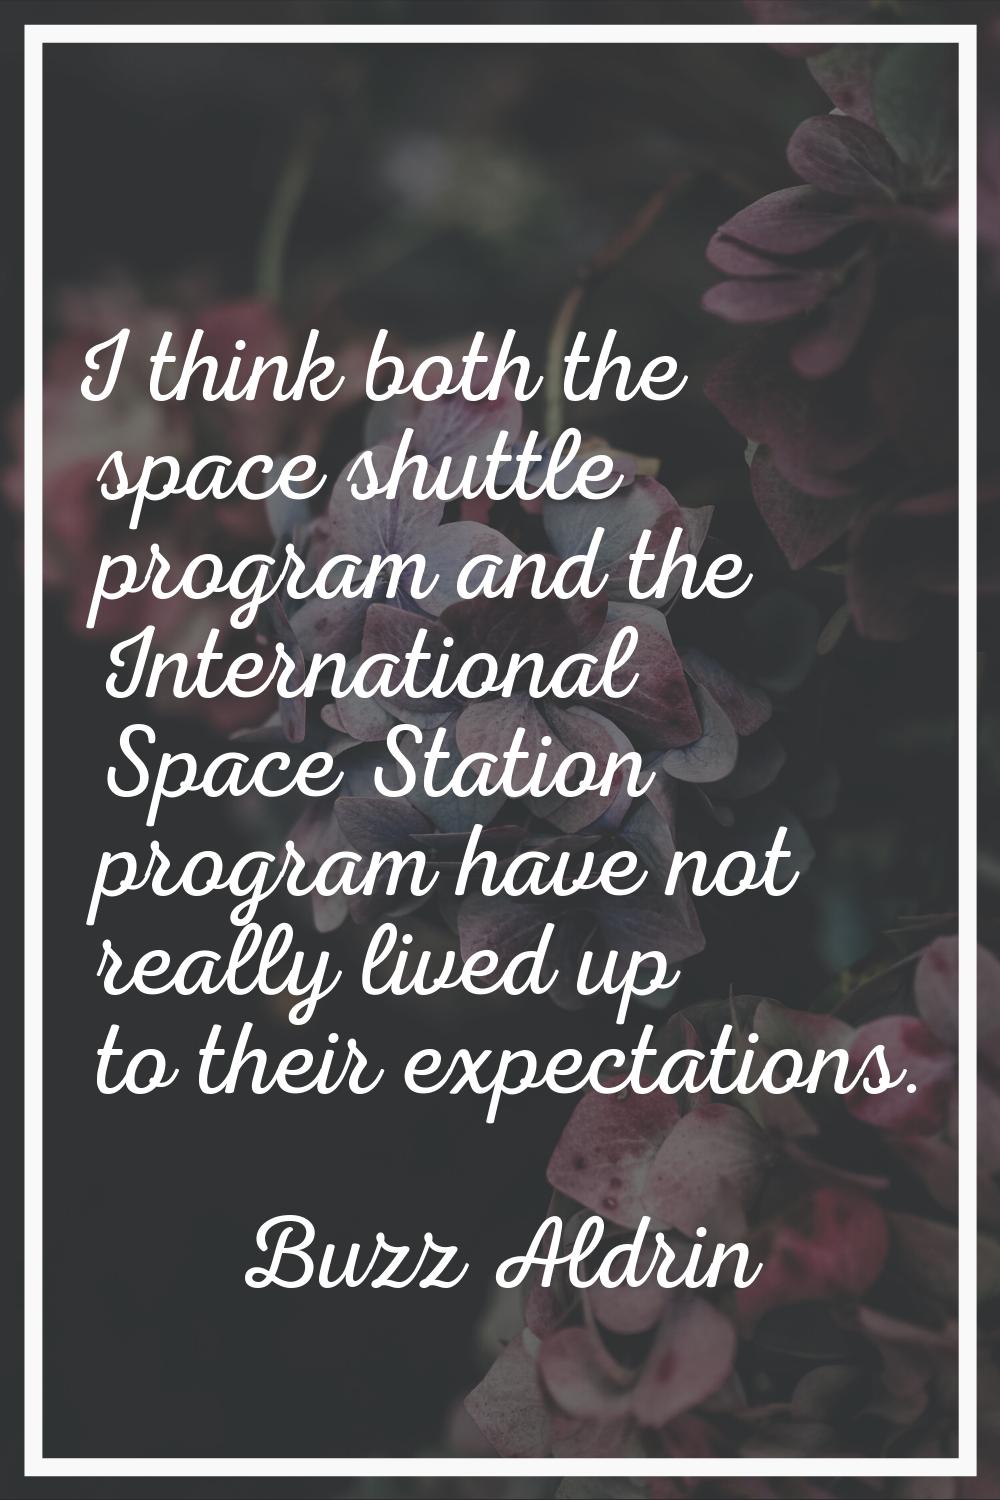 I think both the space shuttle program and the International Space Station program have not really 